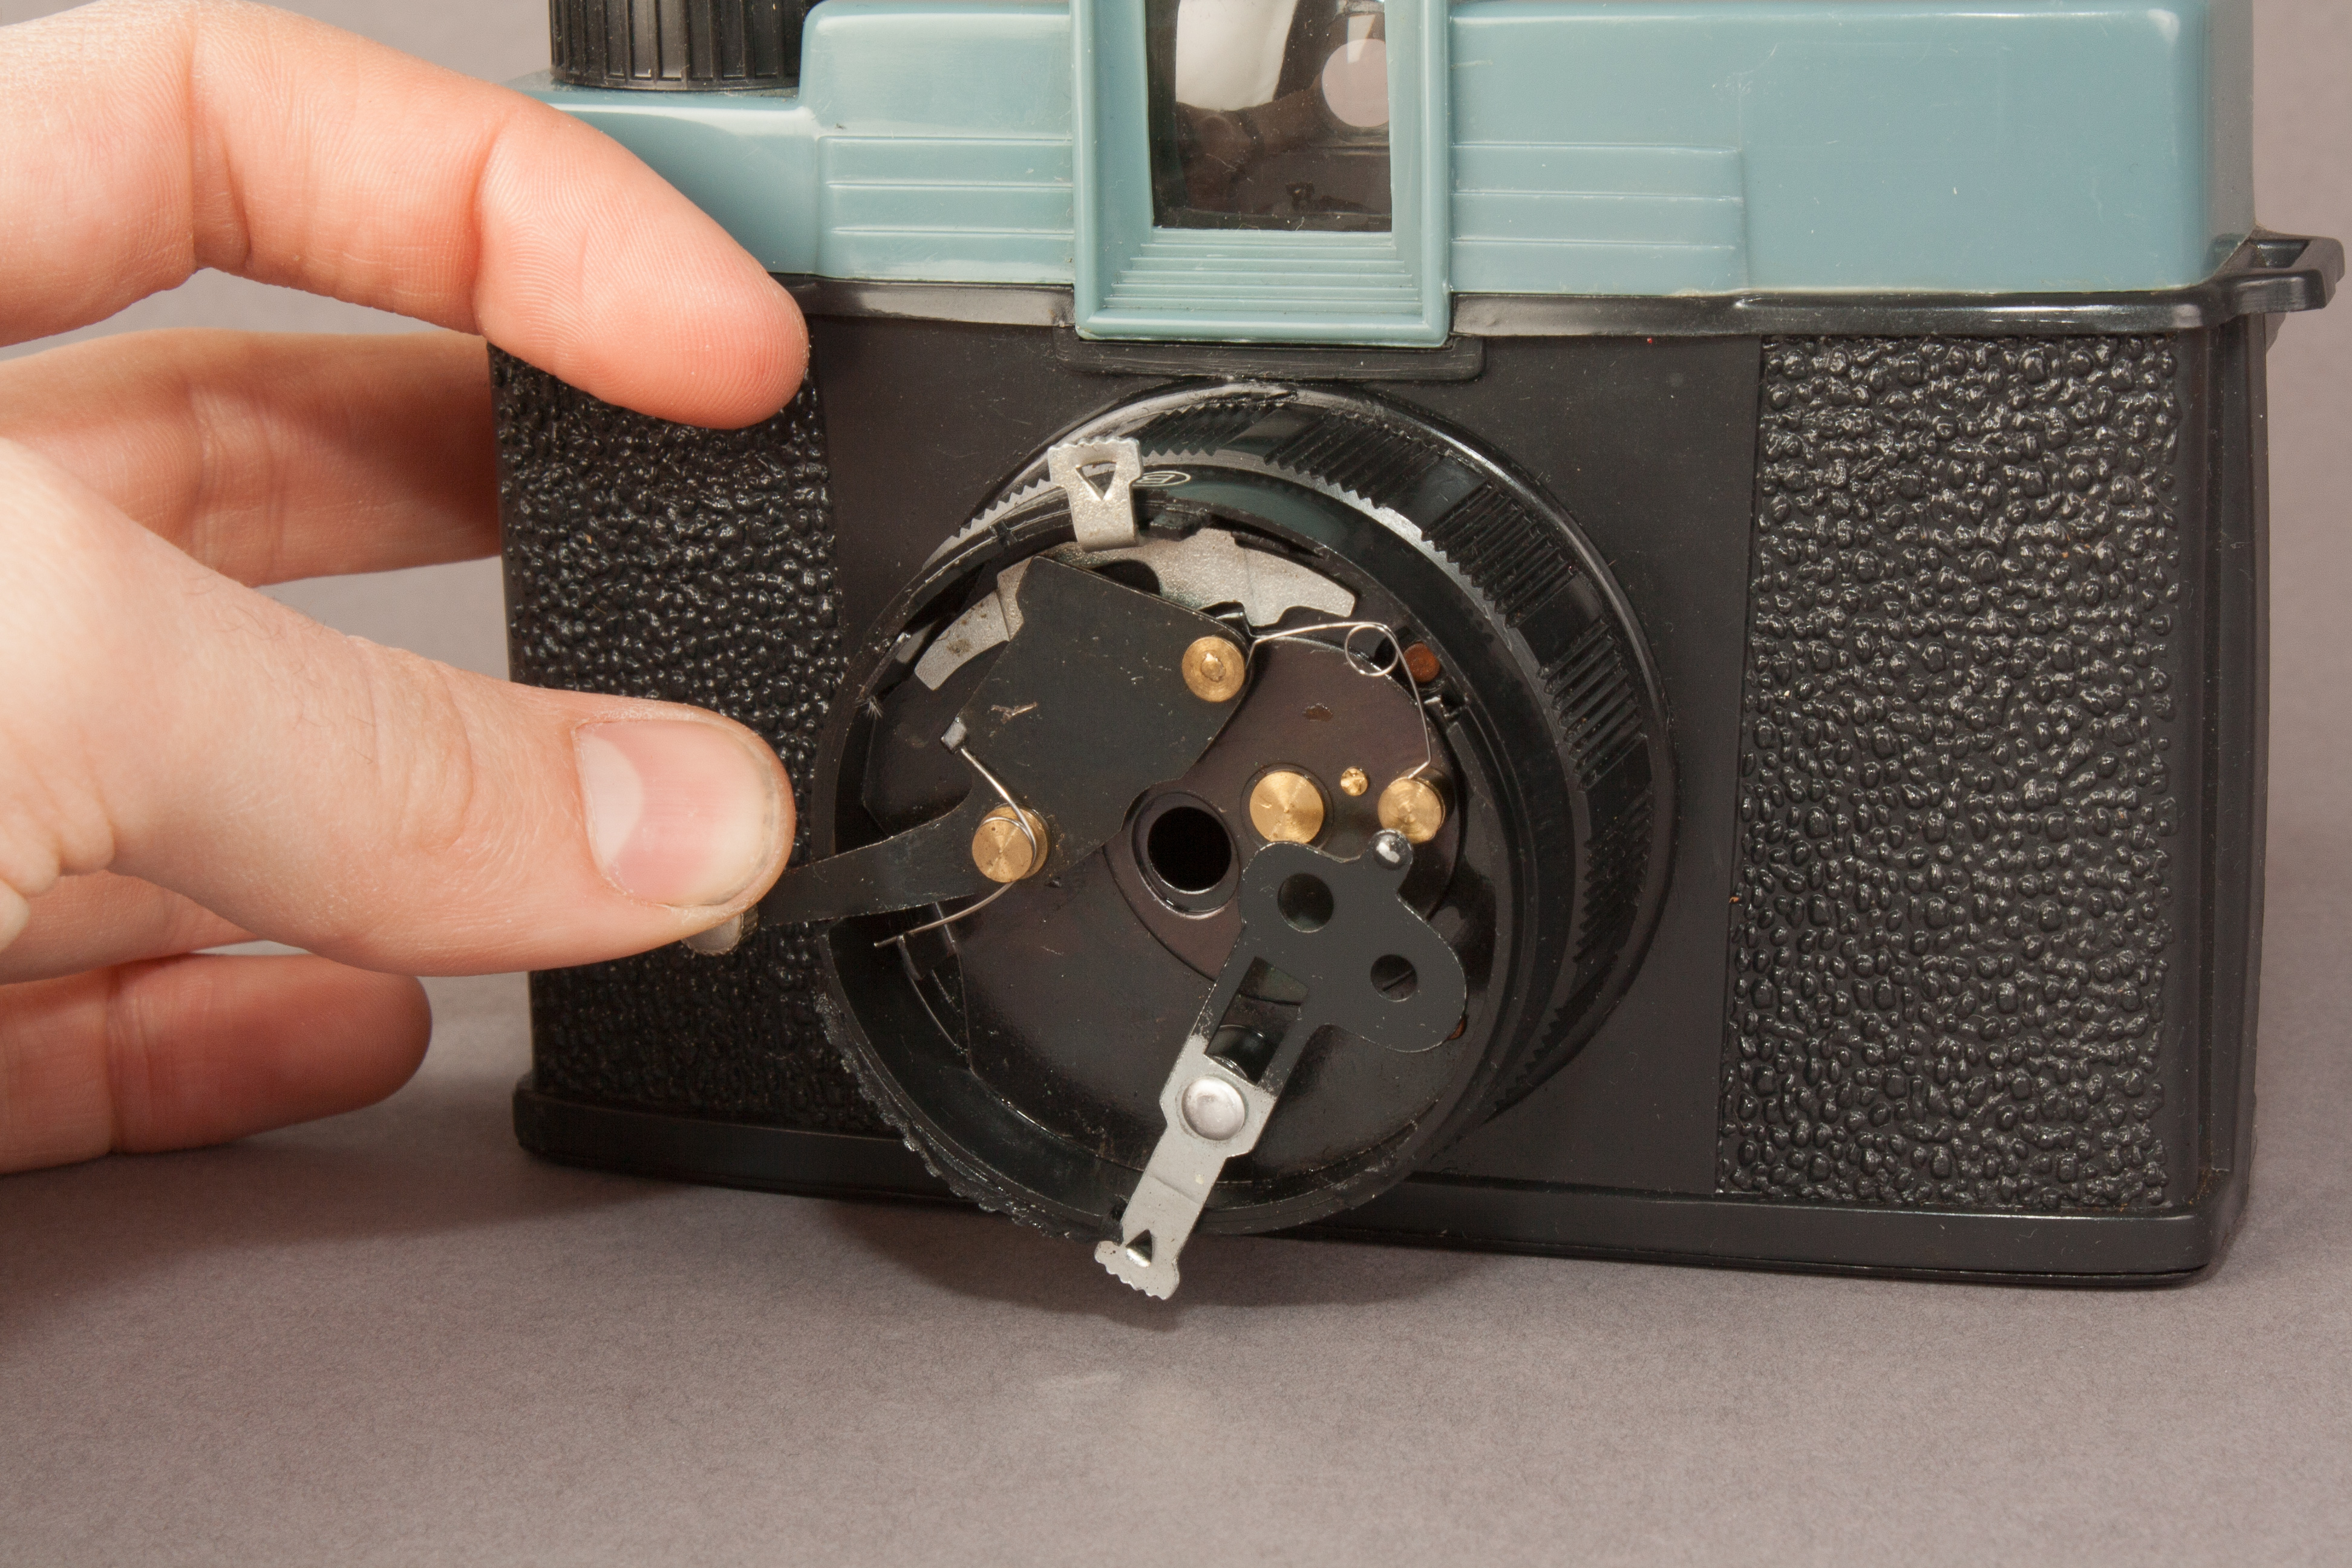 A picture showing the Diana F shutter open